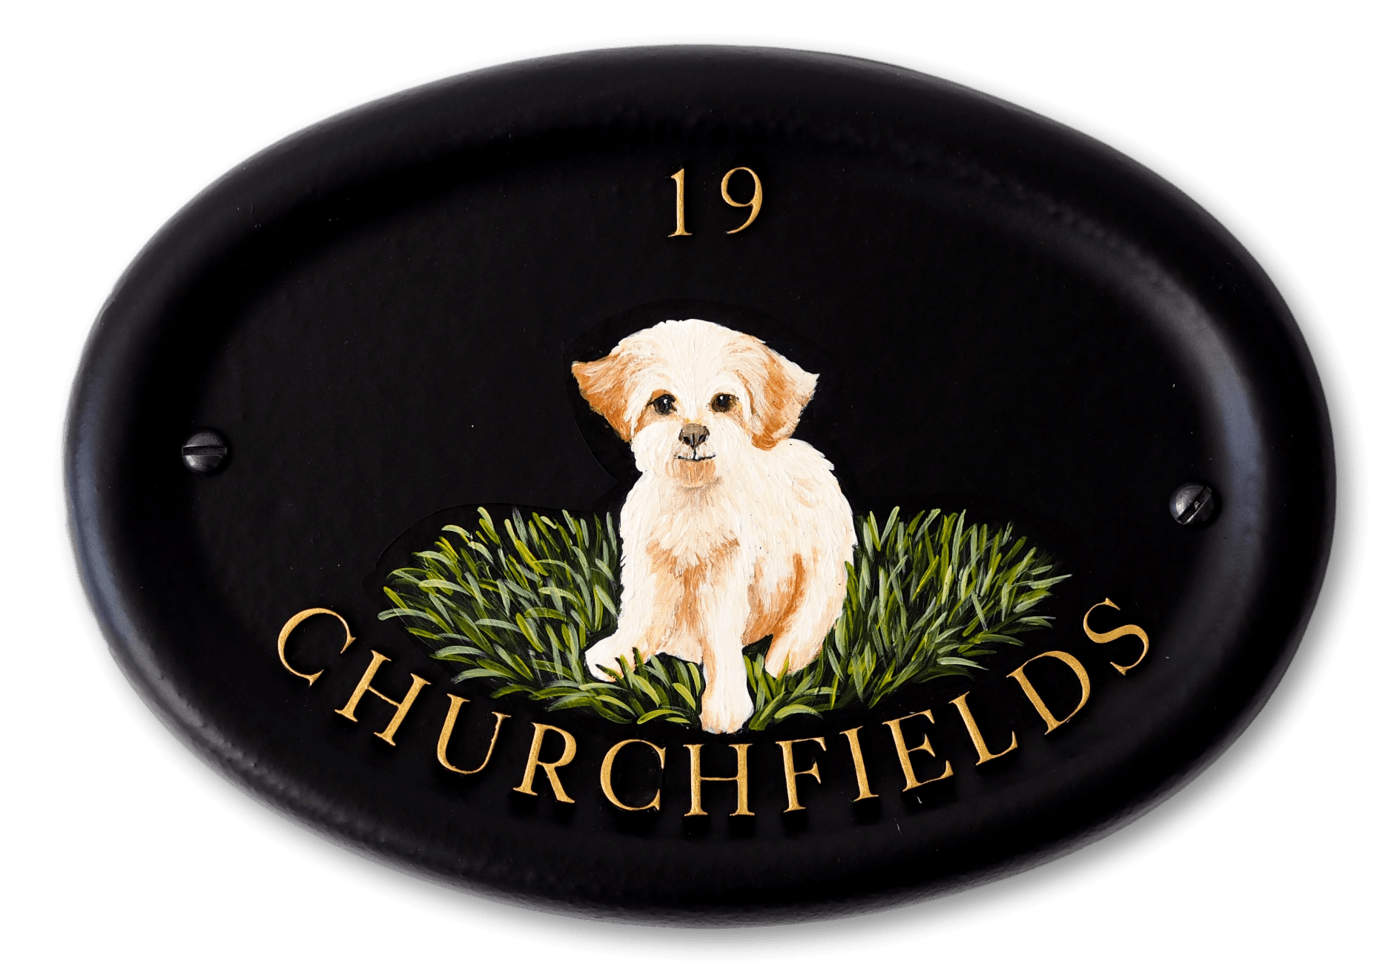 Bichon Frise Flat Painted house sign